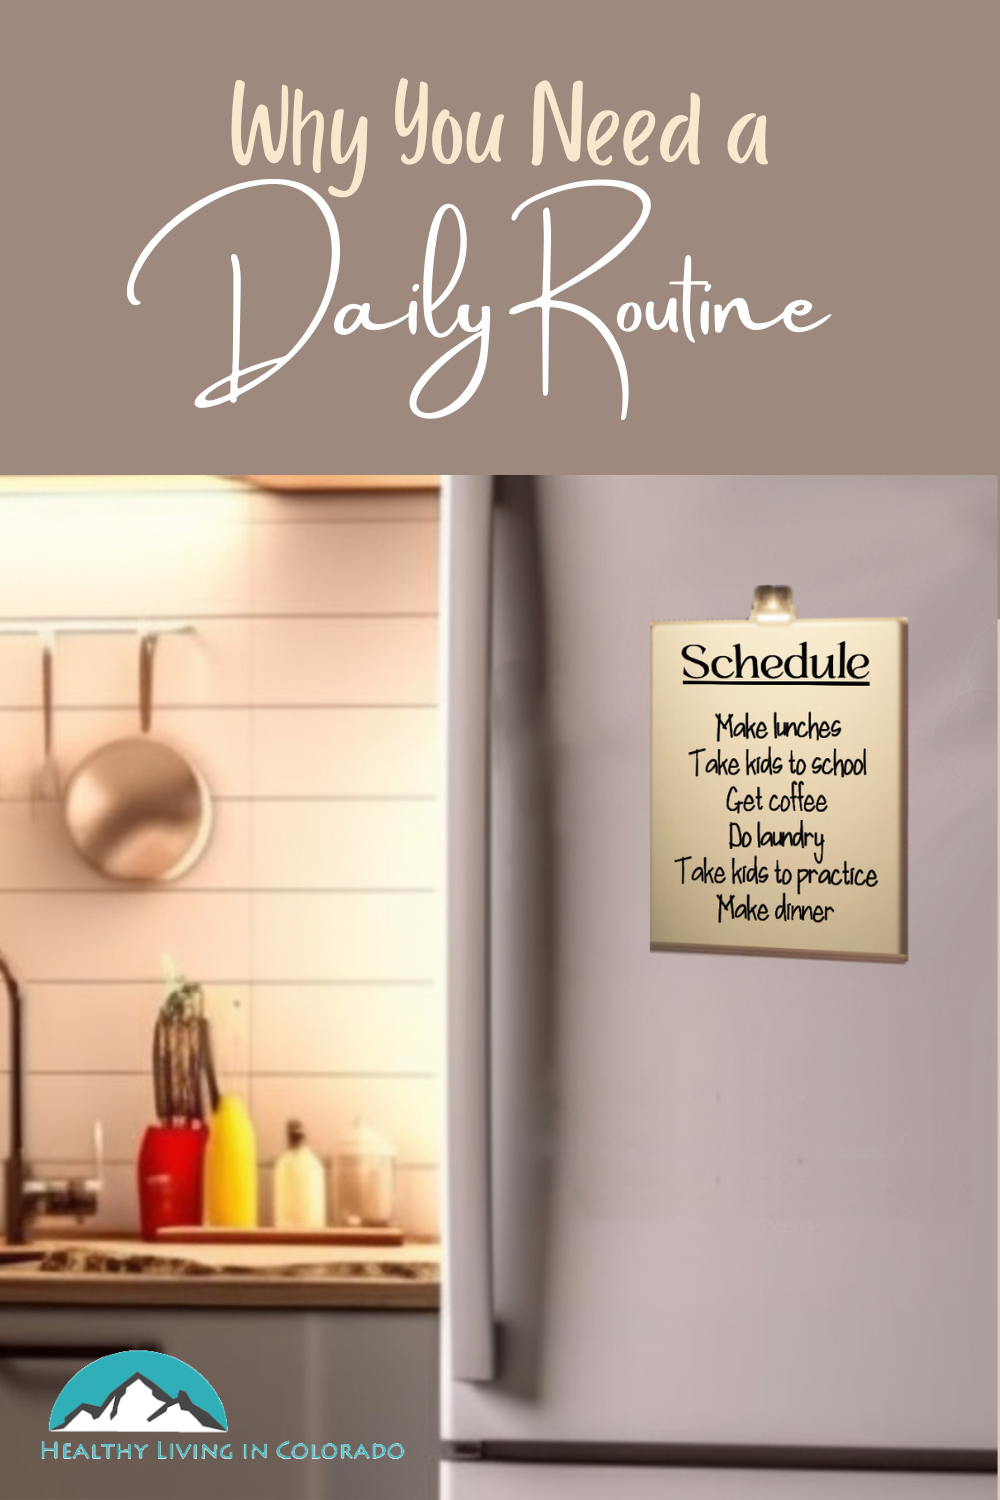 Daily Routine - Healthy Living in Colorado